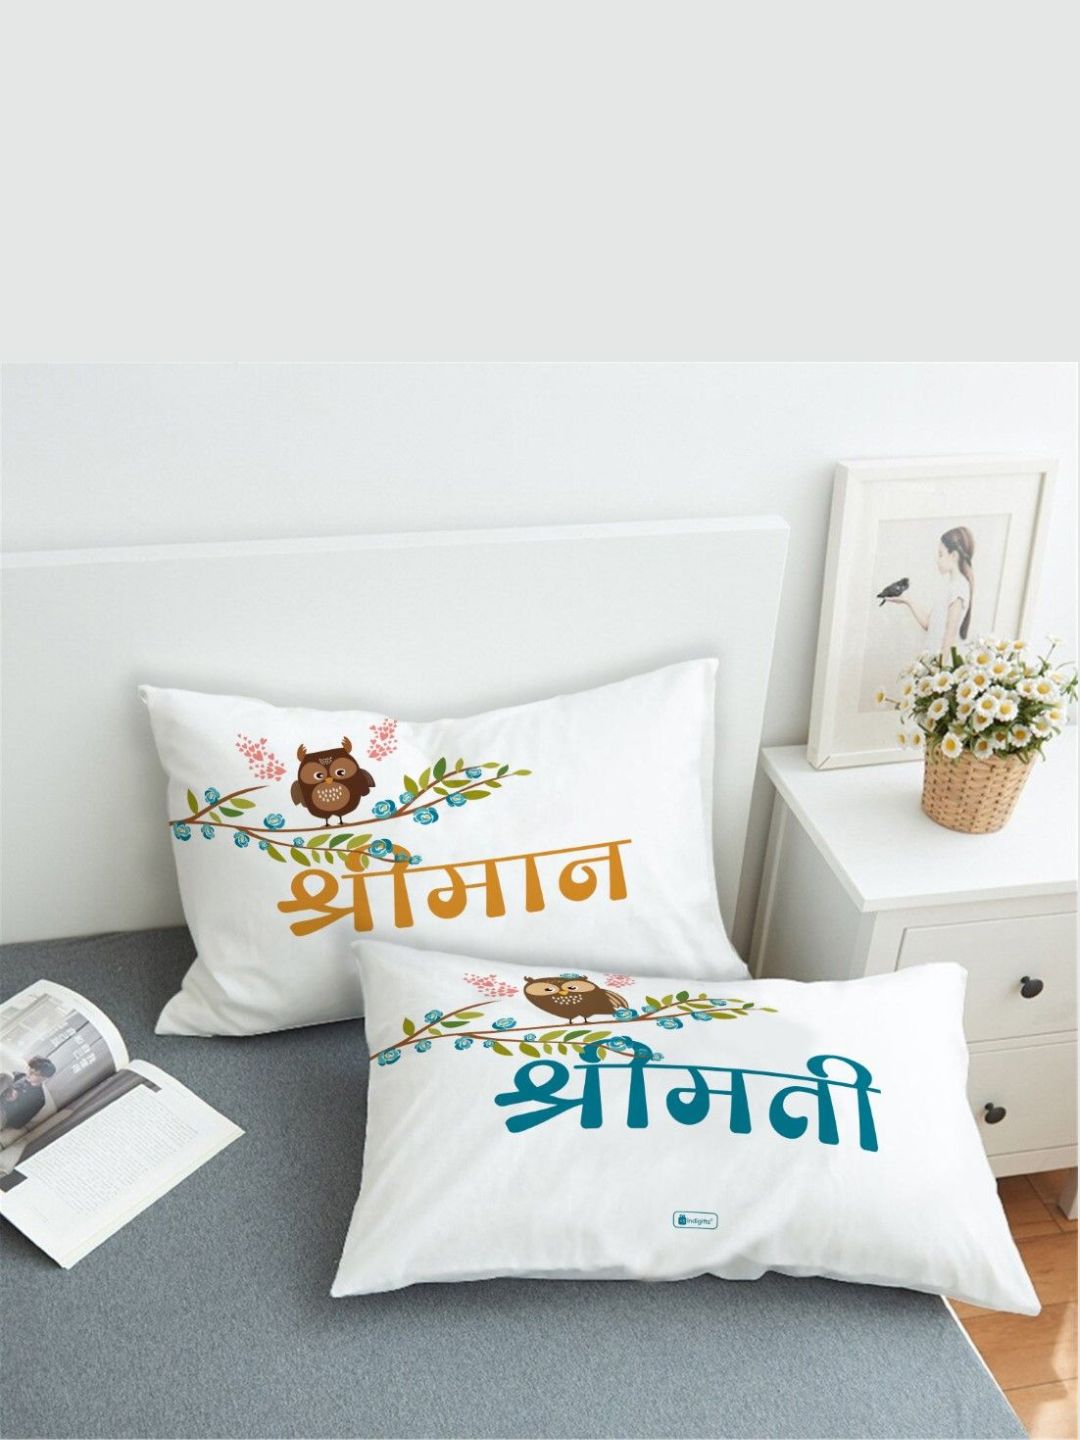 Indigifts Marriage Gifts For Couples Shriman Shreemati Printed Pillow Covers 12″x18″ Set of 2 – Gift For Couple Friends, Anniversary Gift, Wedding Gift, Newly Wed Gifts For Couple